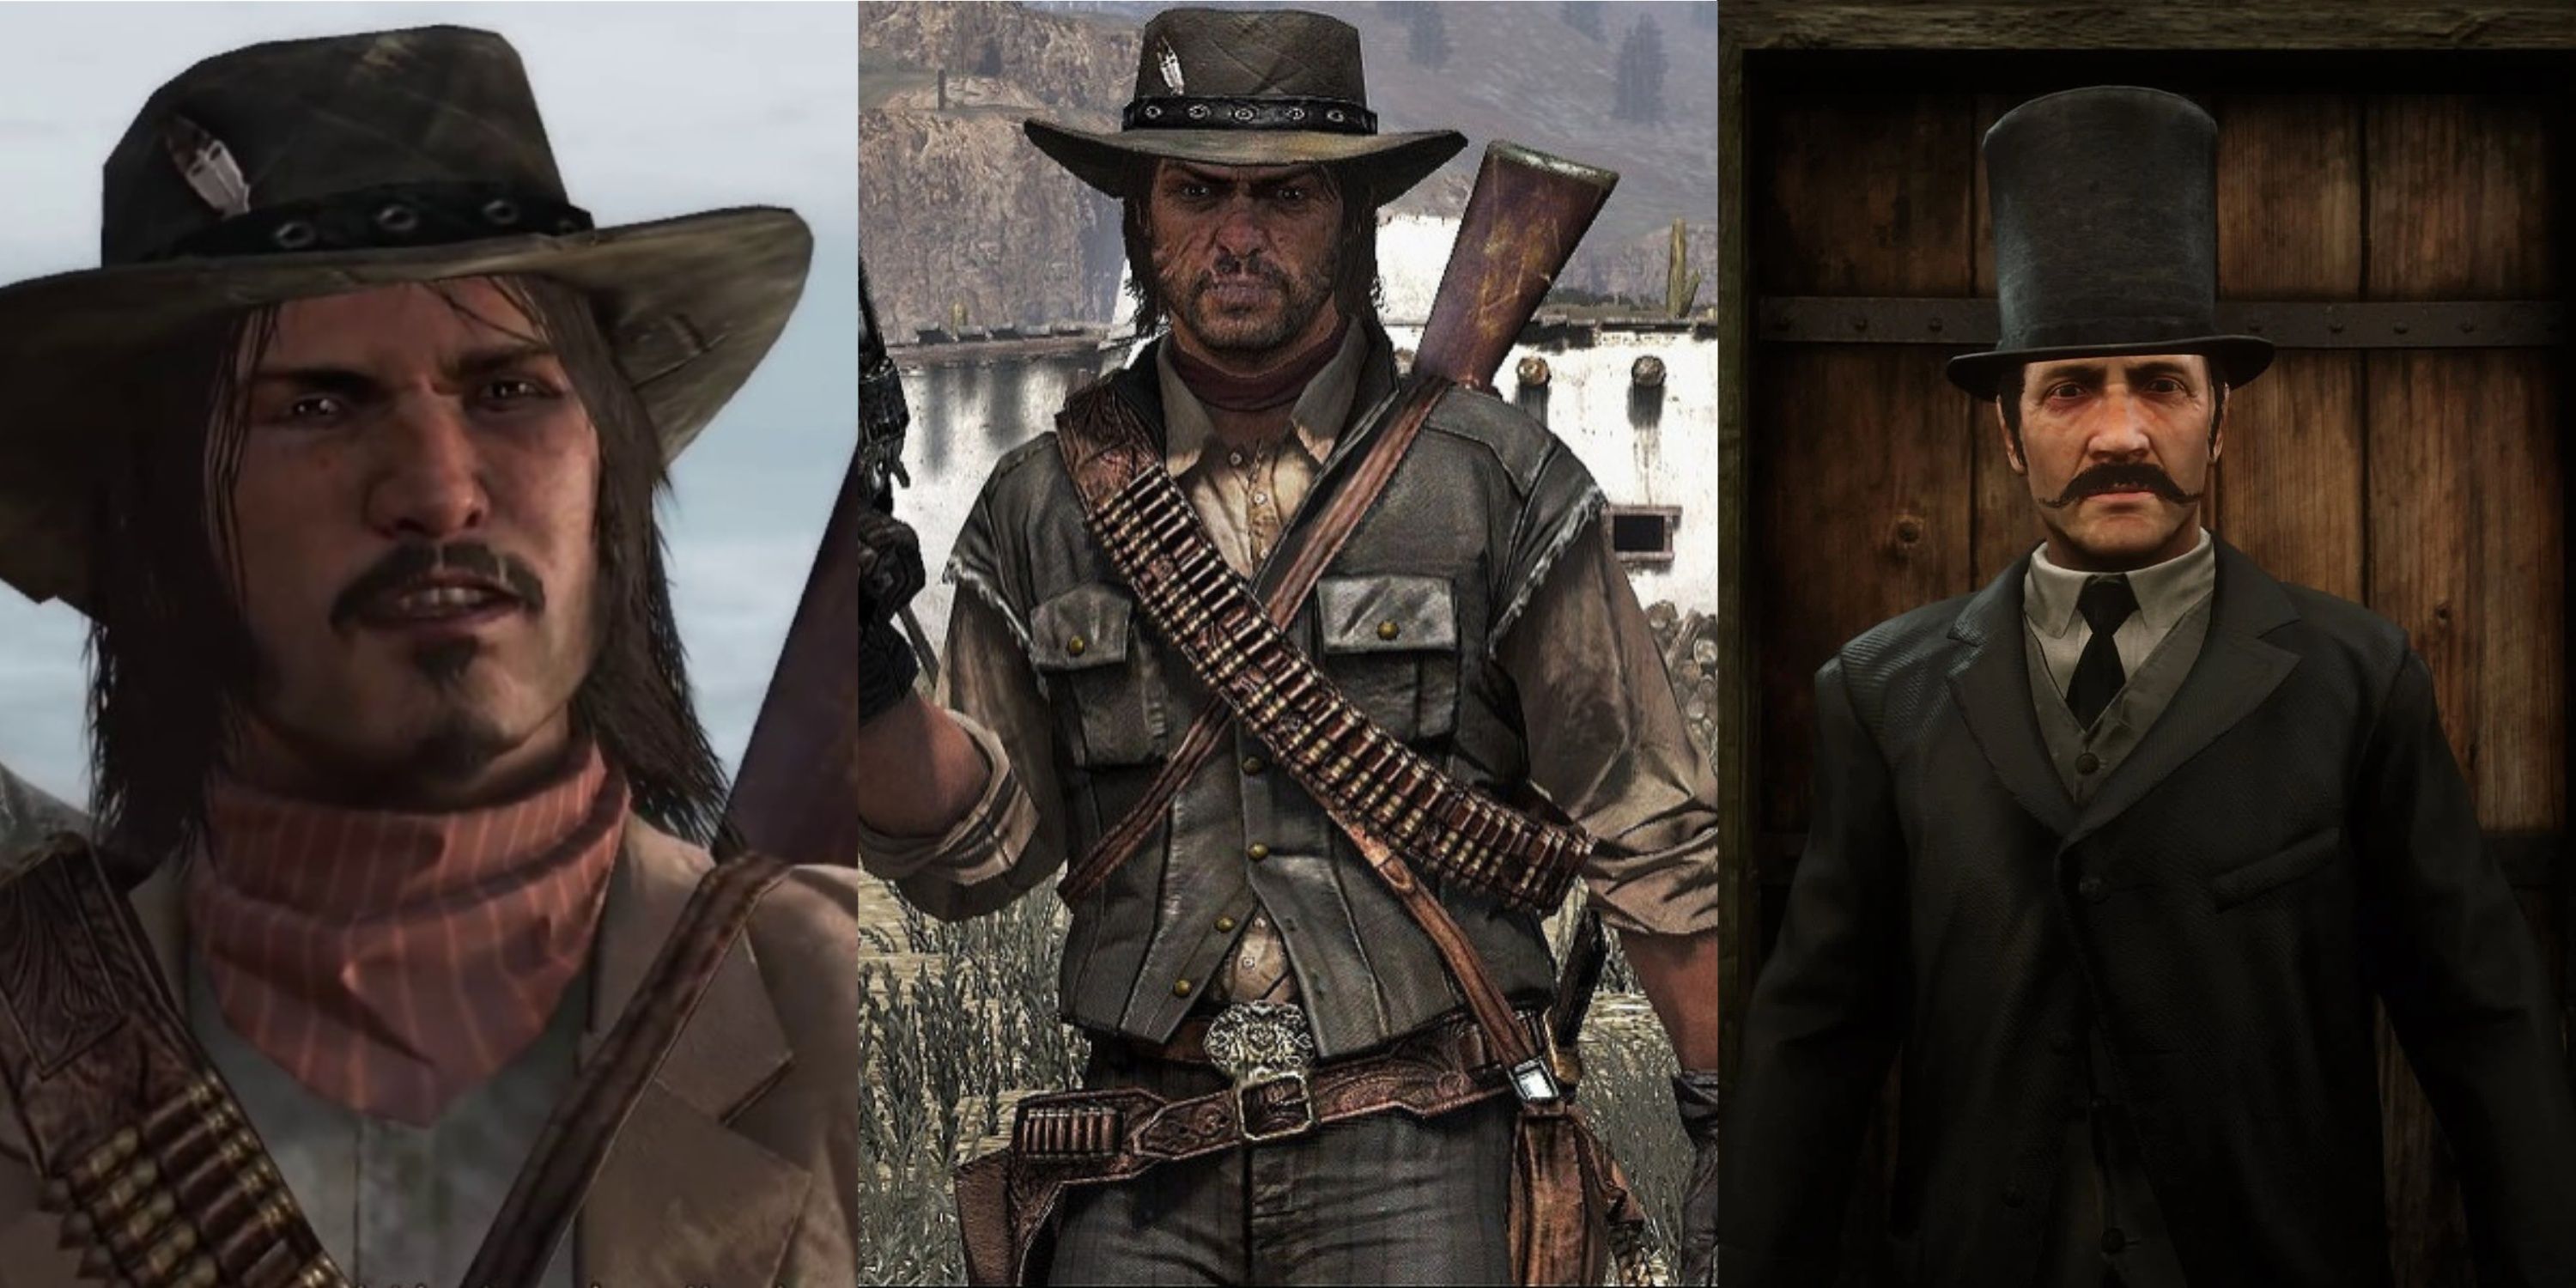 Red Dead Redemption feature image with John Marston, Jack Marston and the Strange Man